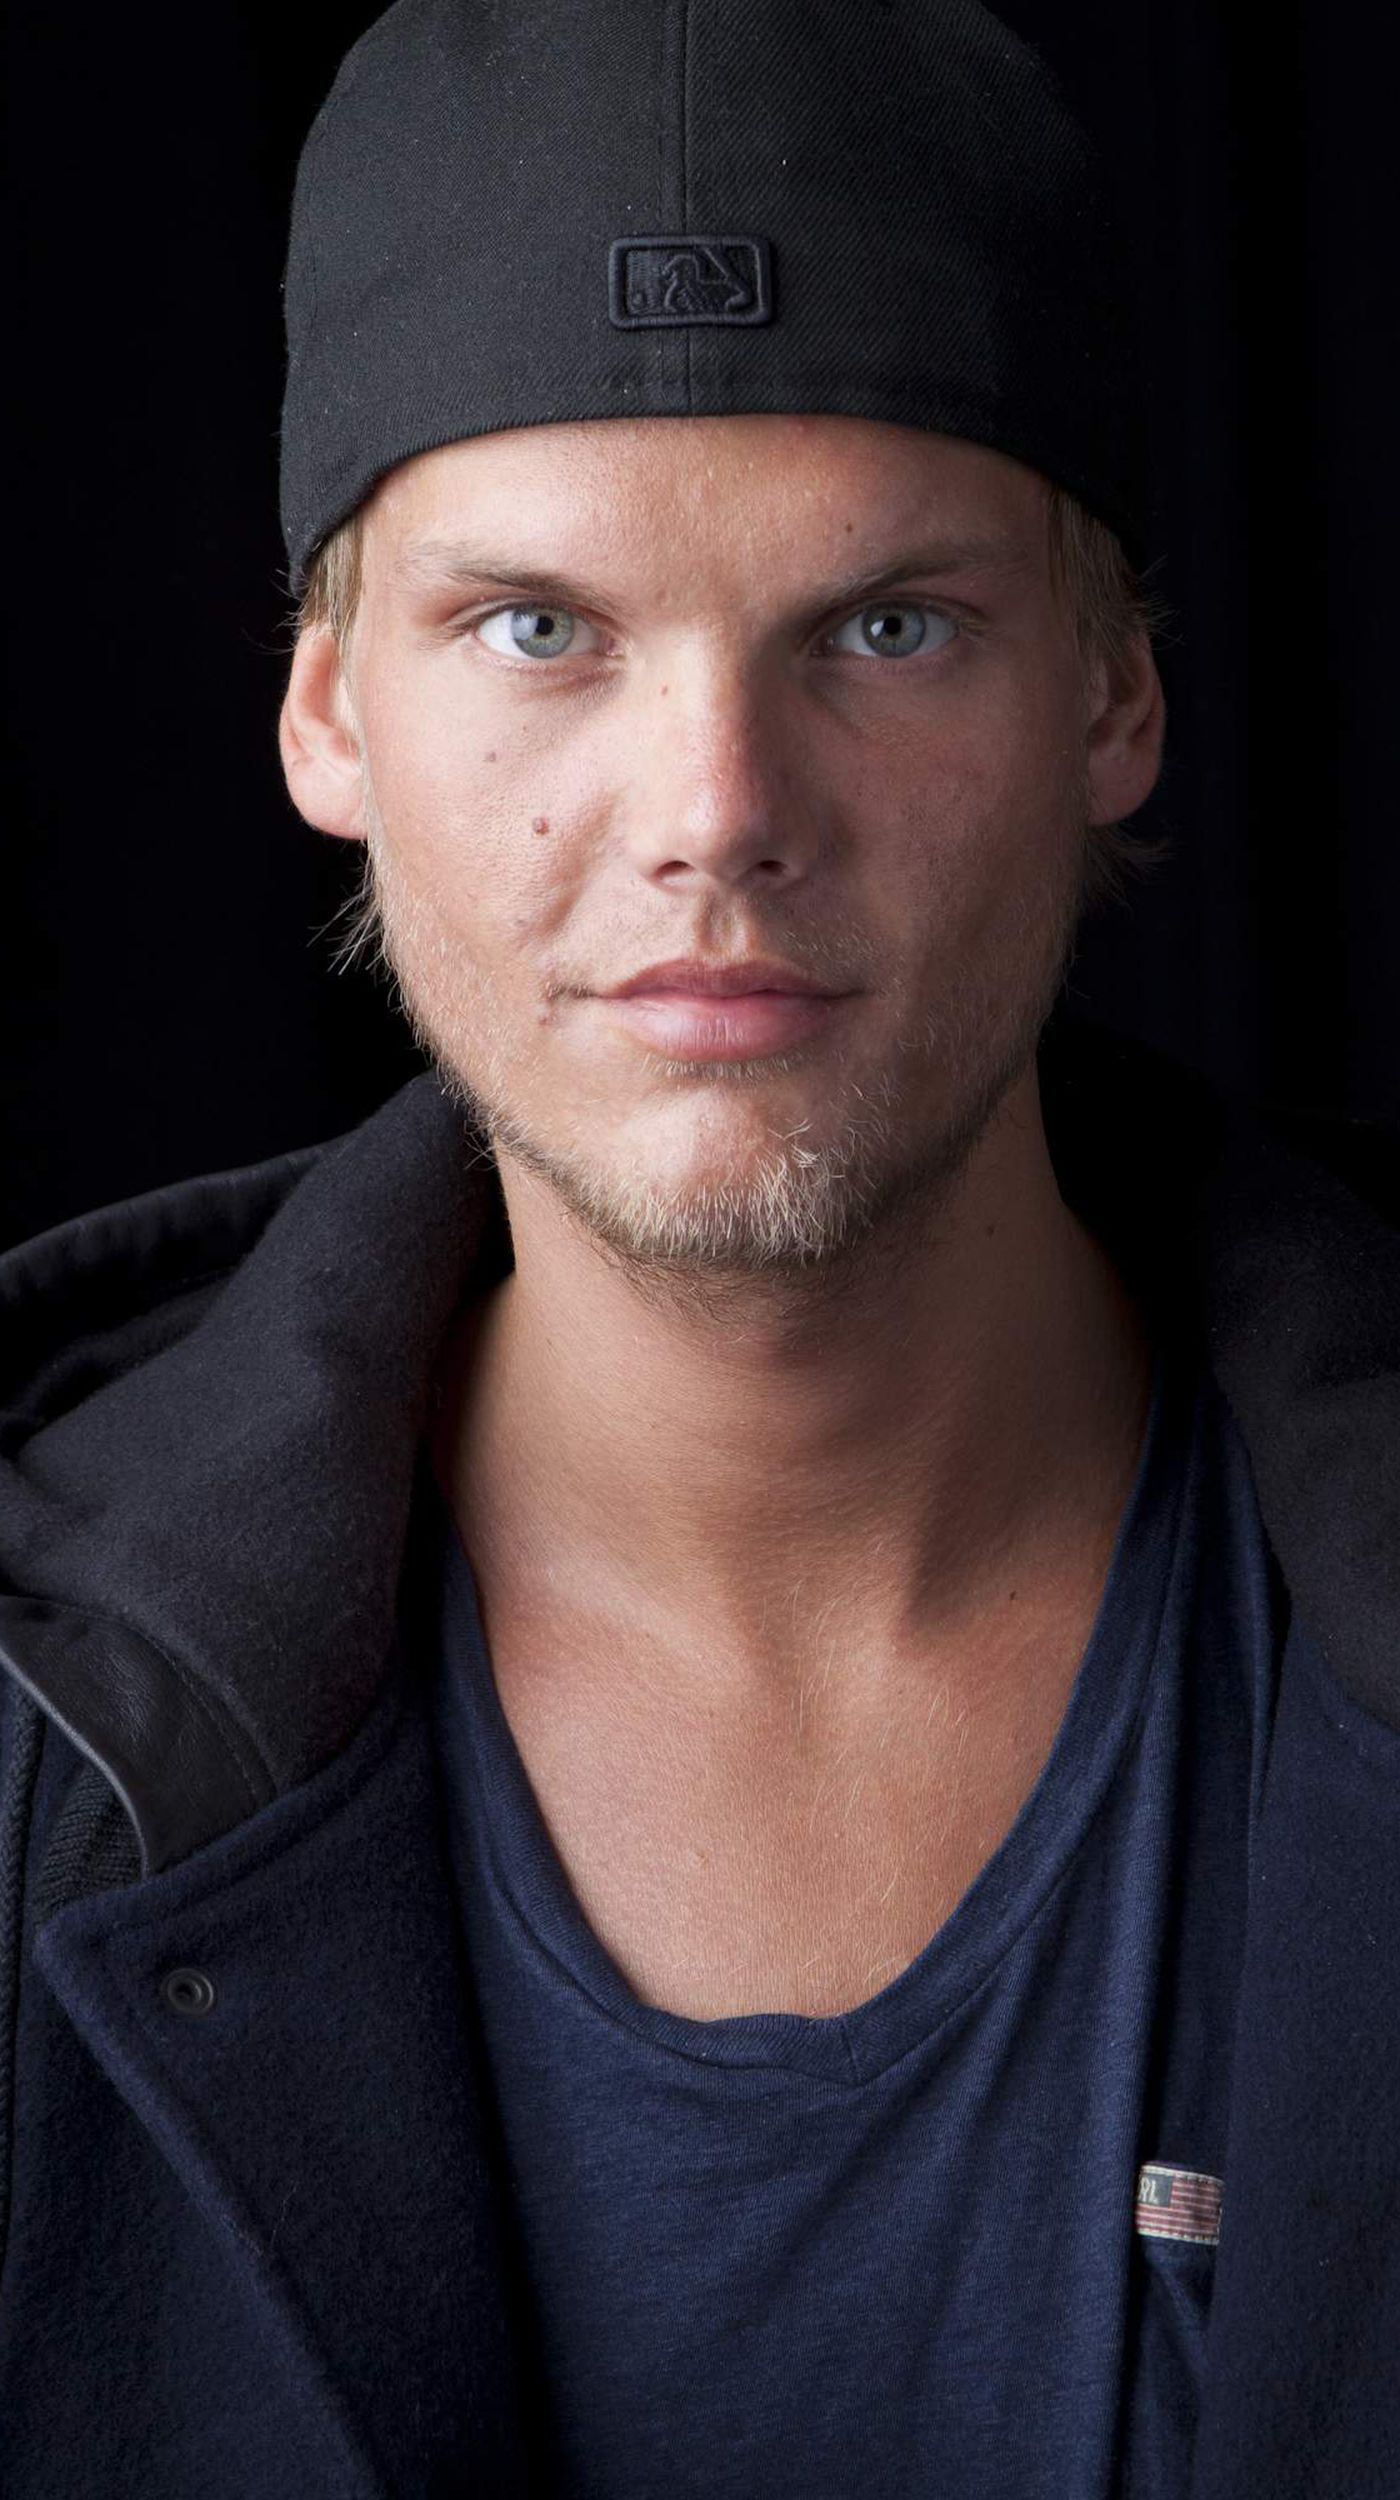 Producer and DJ Avicii has been found dead